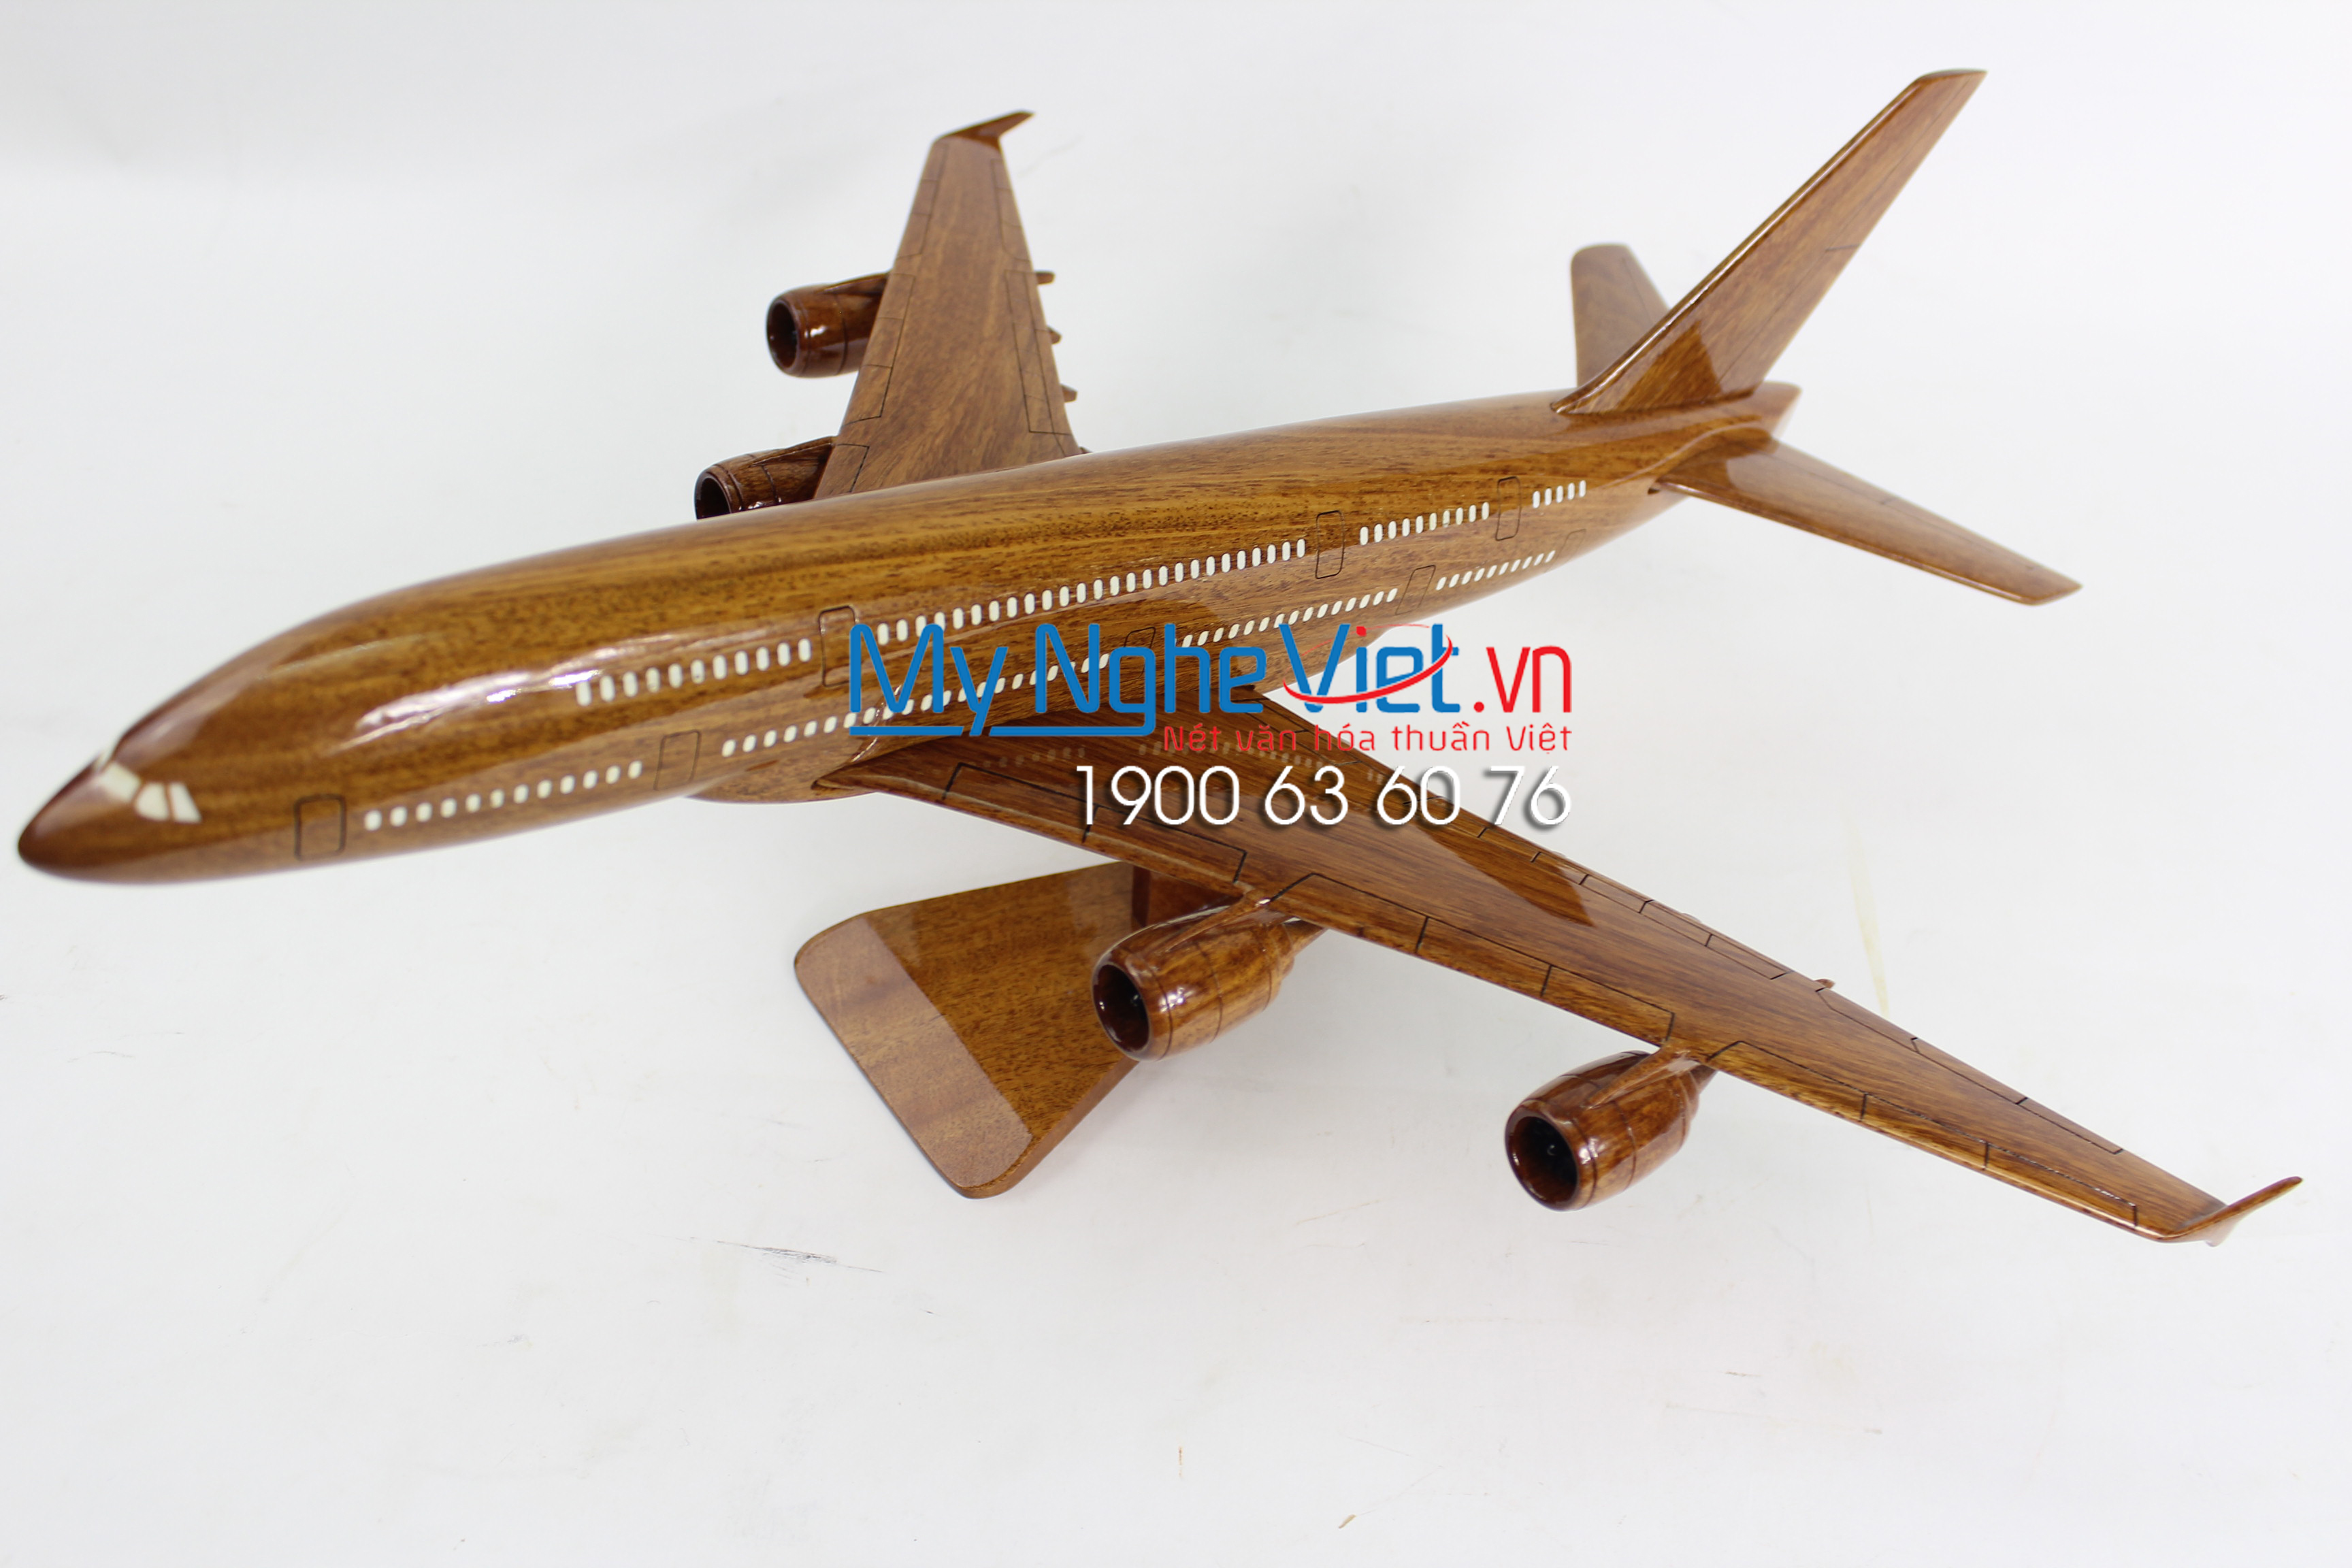 Wood Airline Model A380 MNV-MB04